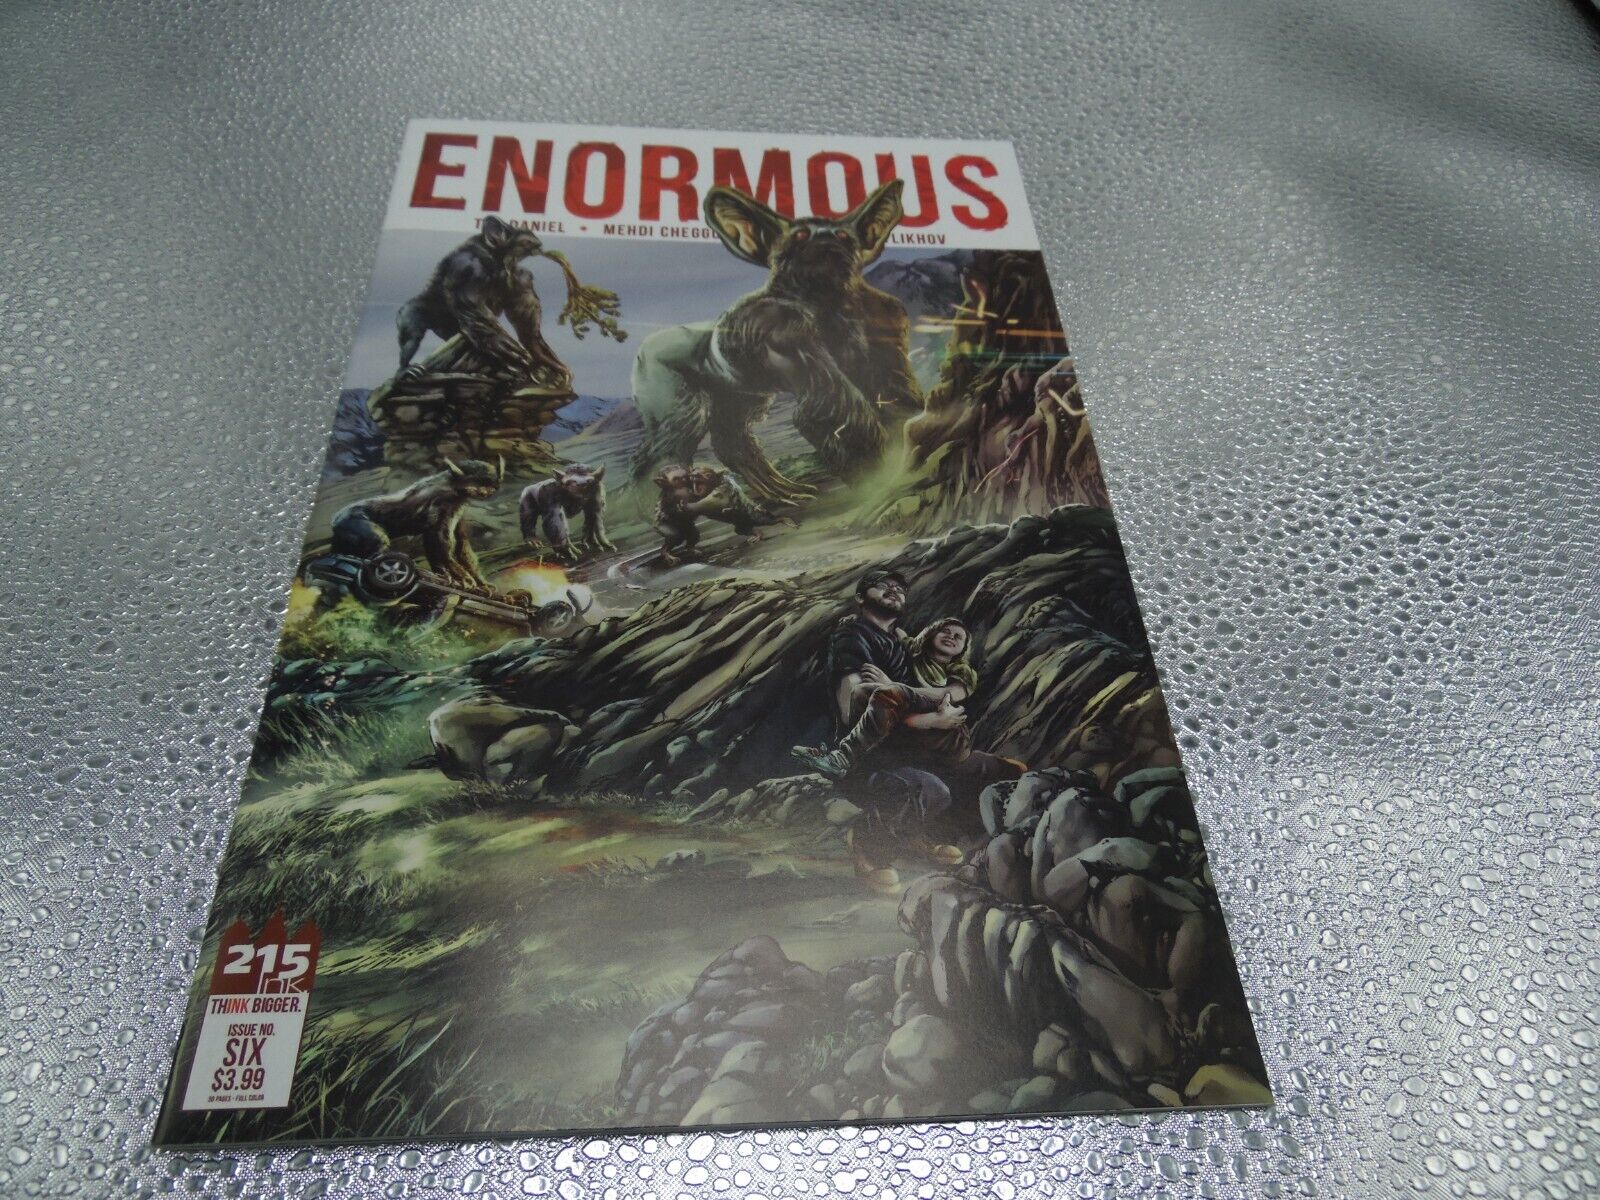 ENORMOUS #6 2014 FIRST PRINTING 215 INK